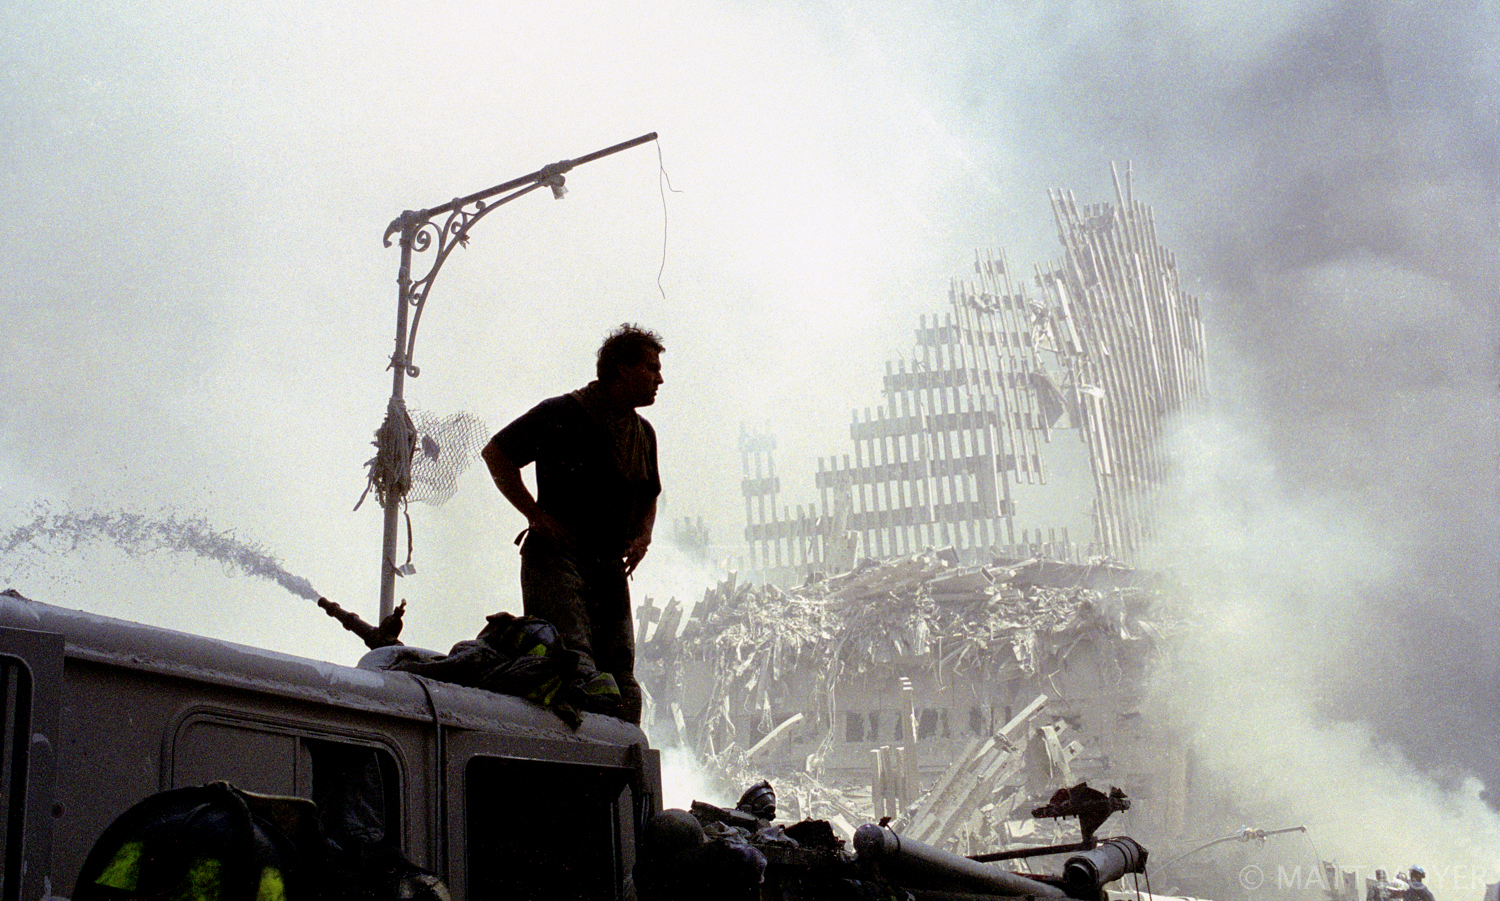  A firefighter stands atop a demolished fire truck at ground zero after the destruction of the World Trade Center on Sept. 11, 2001. 